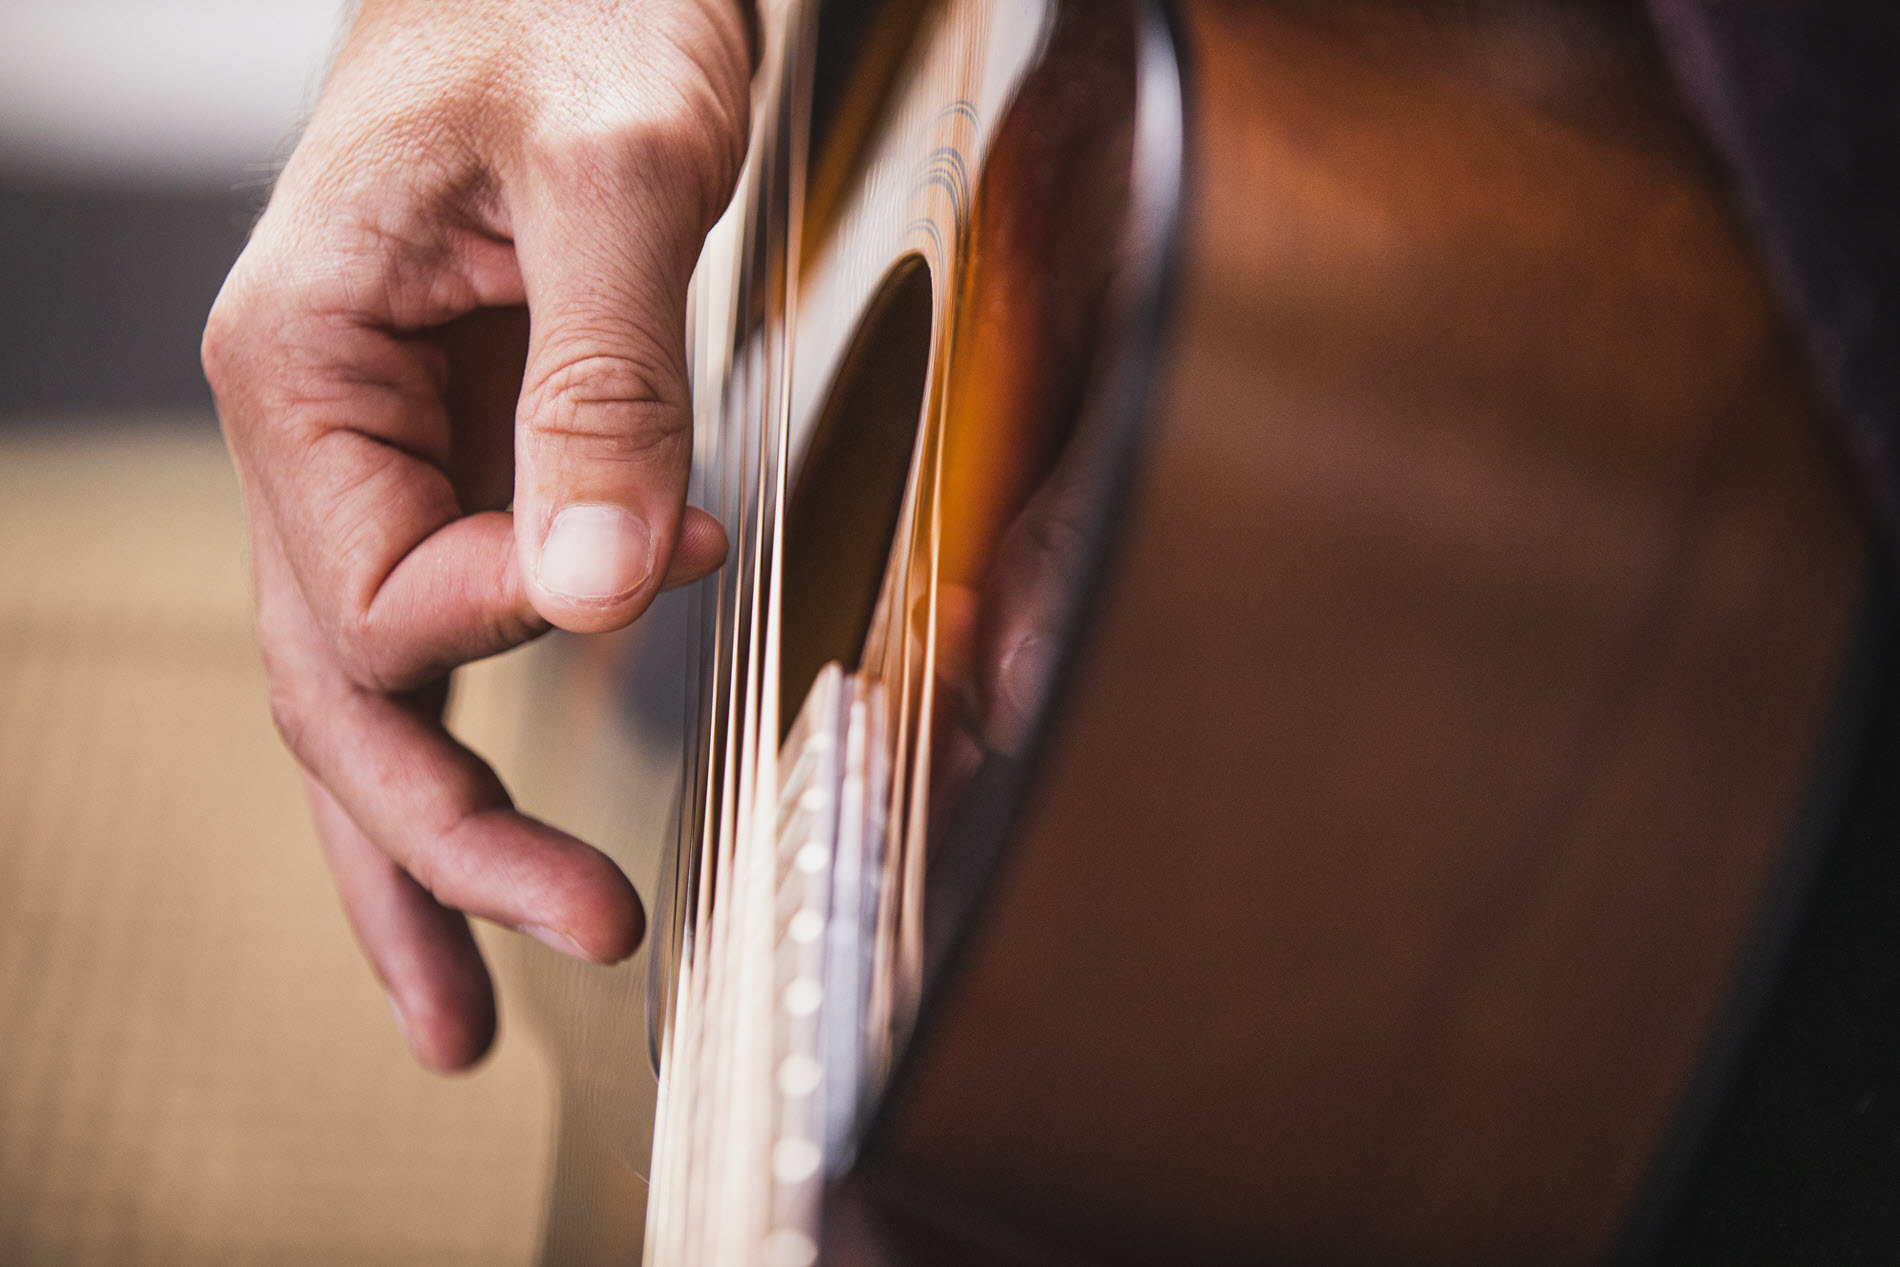 Closeup of someone playing an acoustic guitar.